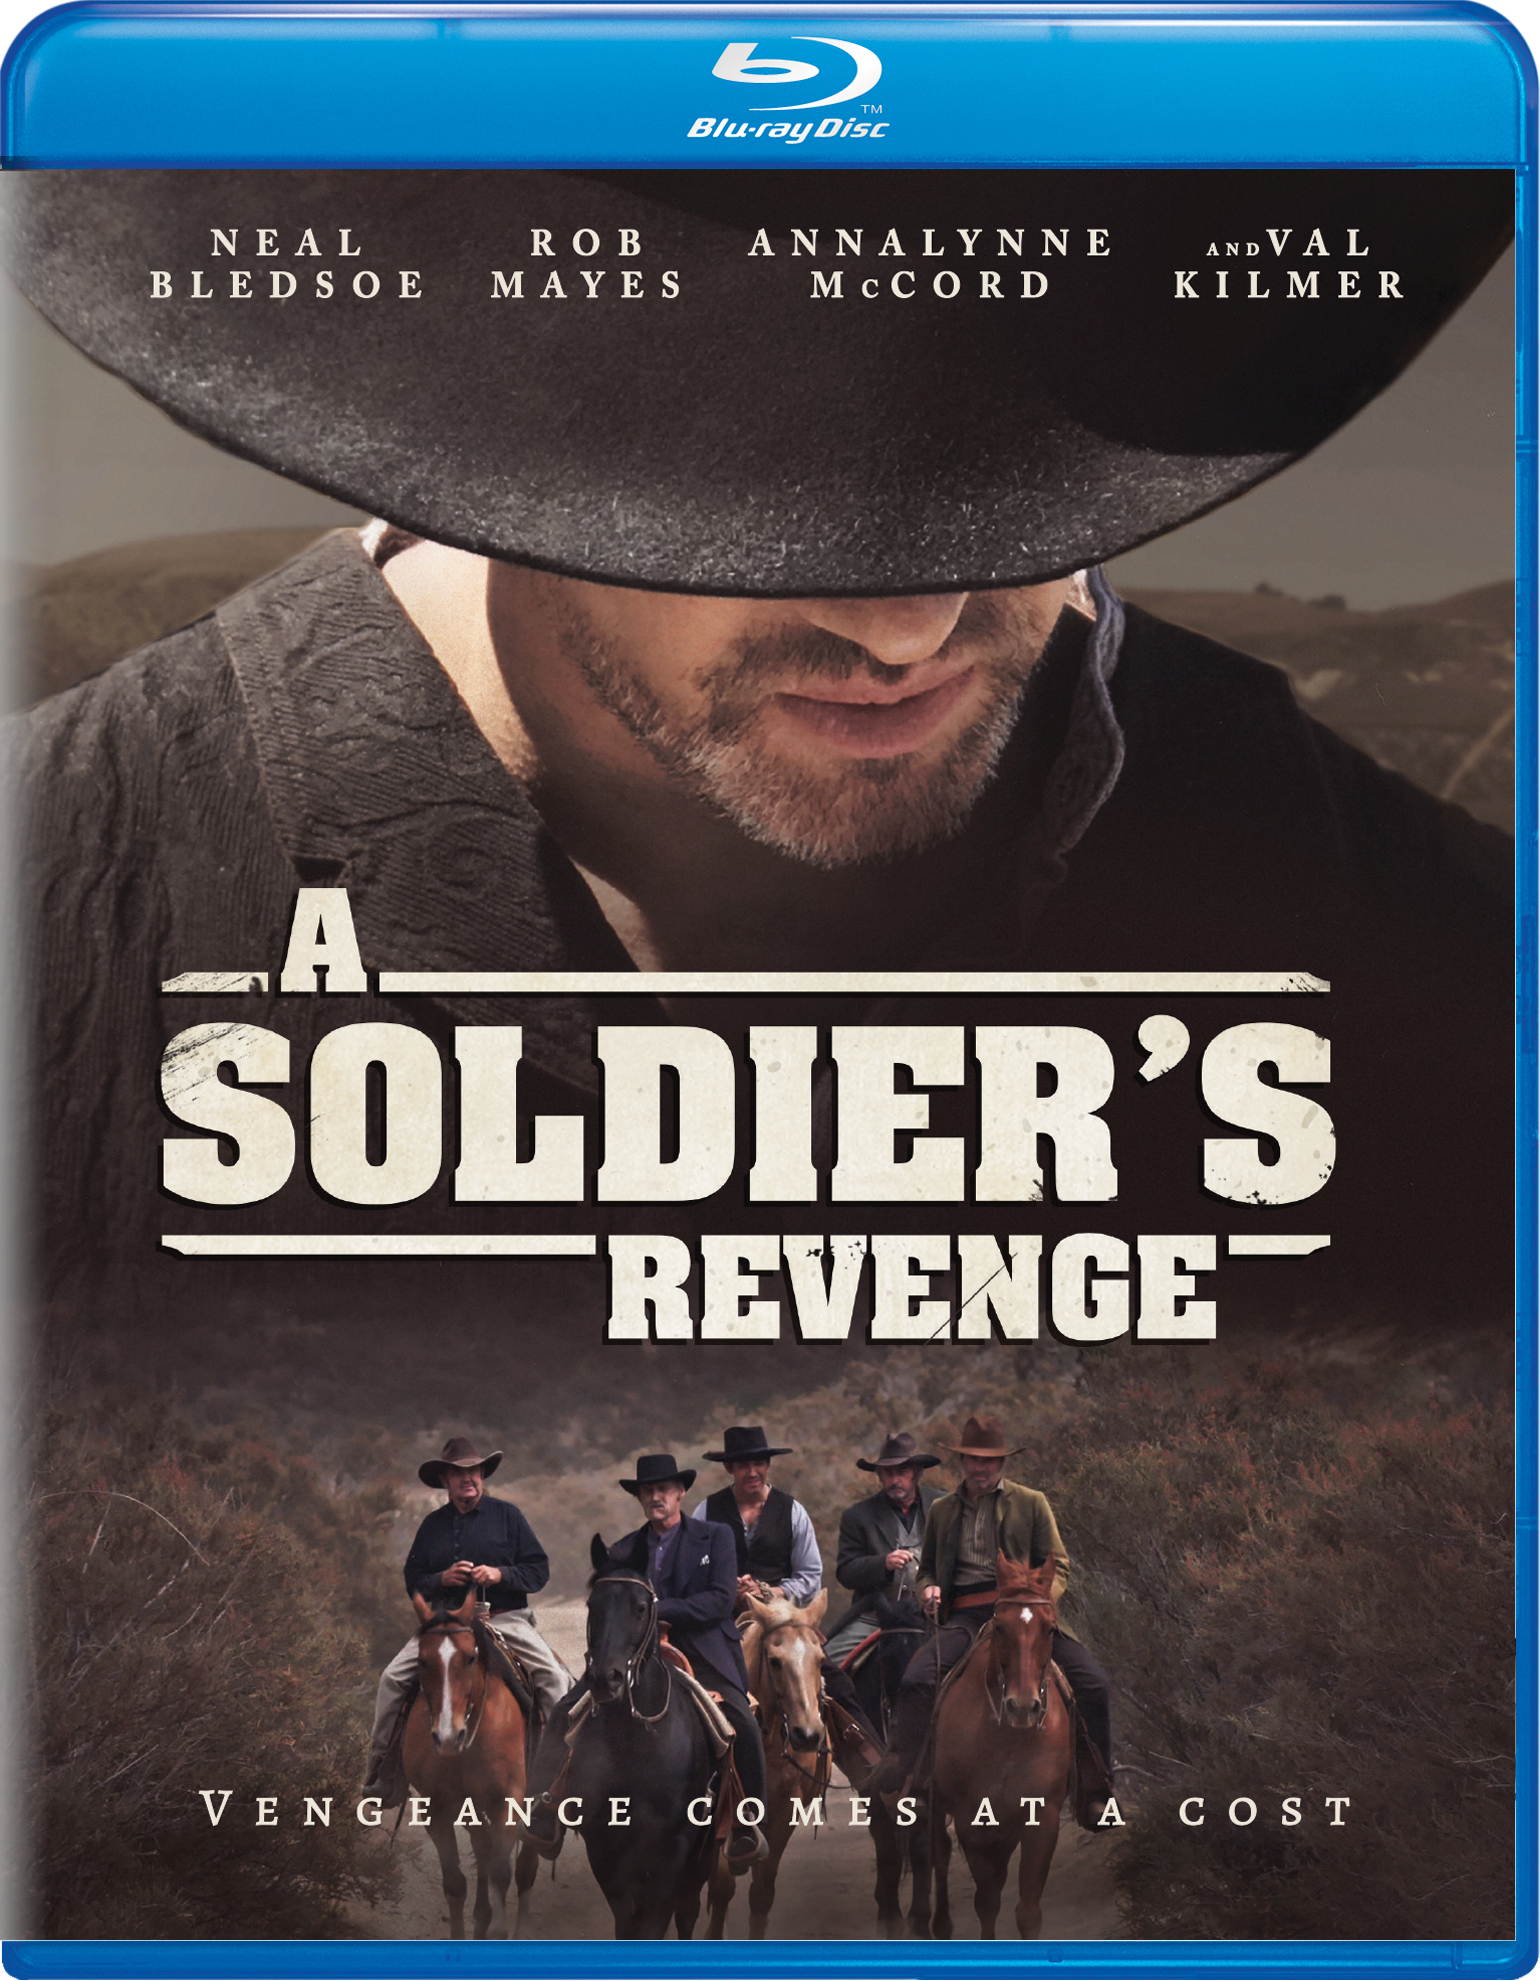 A Soldier's Revenge - Blu-ray [ 2020 ]  - Action Movies On Blu-ray - Movies On GRUV